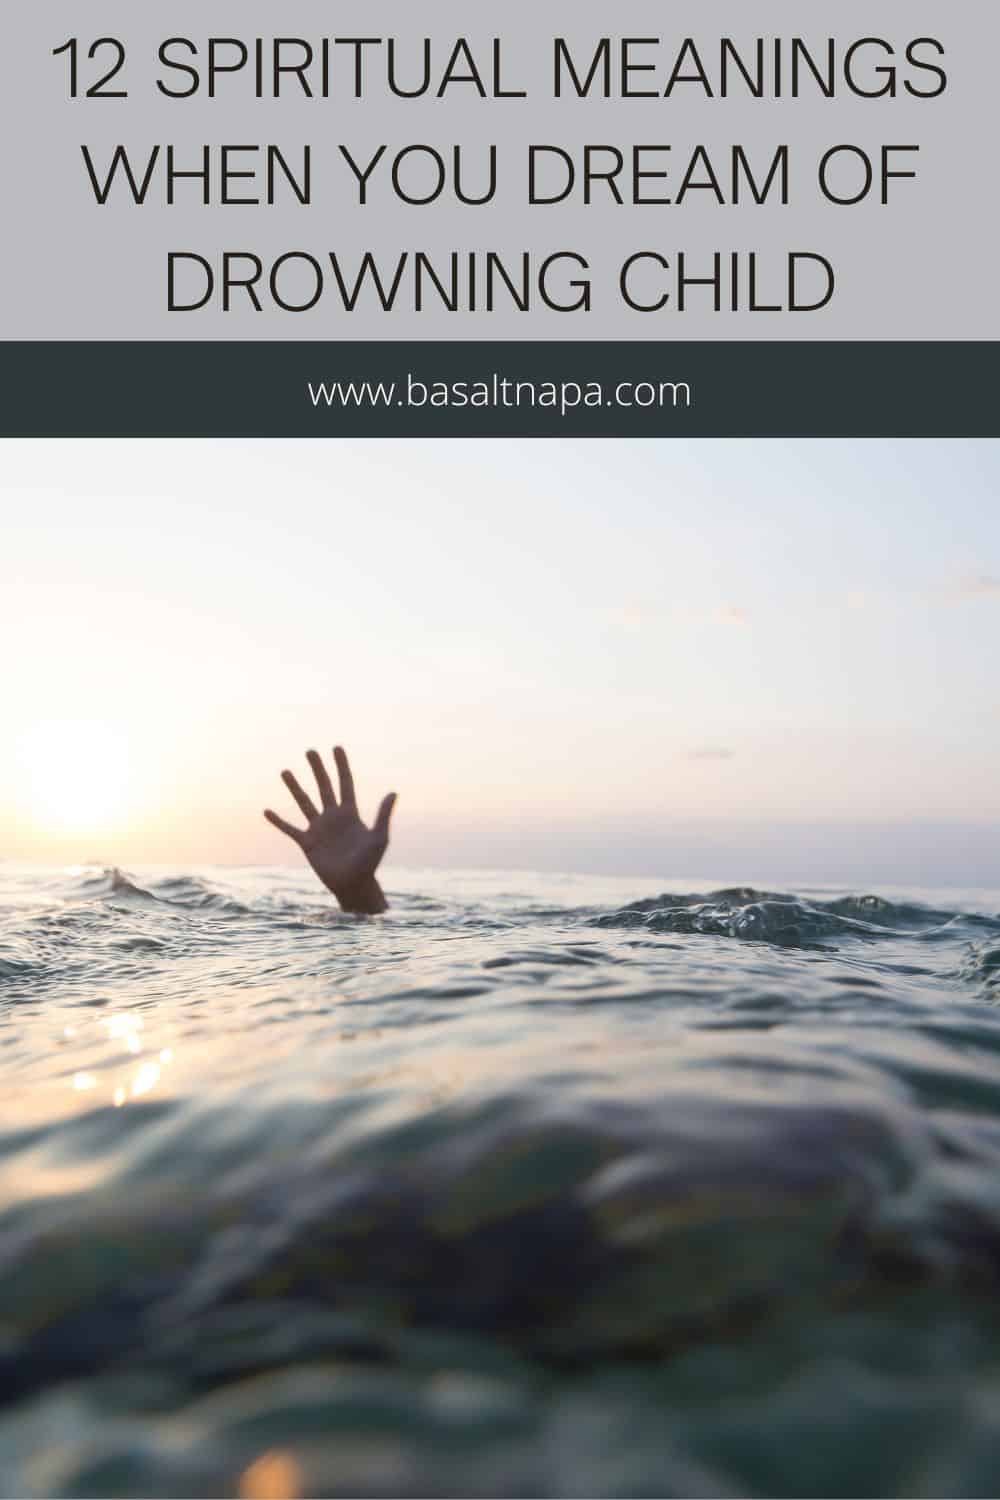 12 Spiritual Meanings When You Dream Of Drowning Child